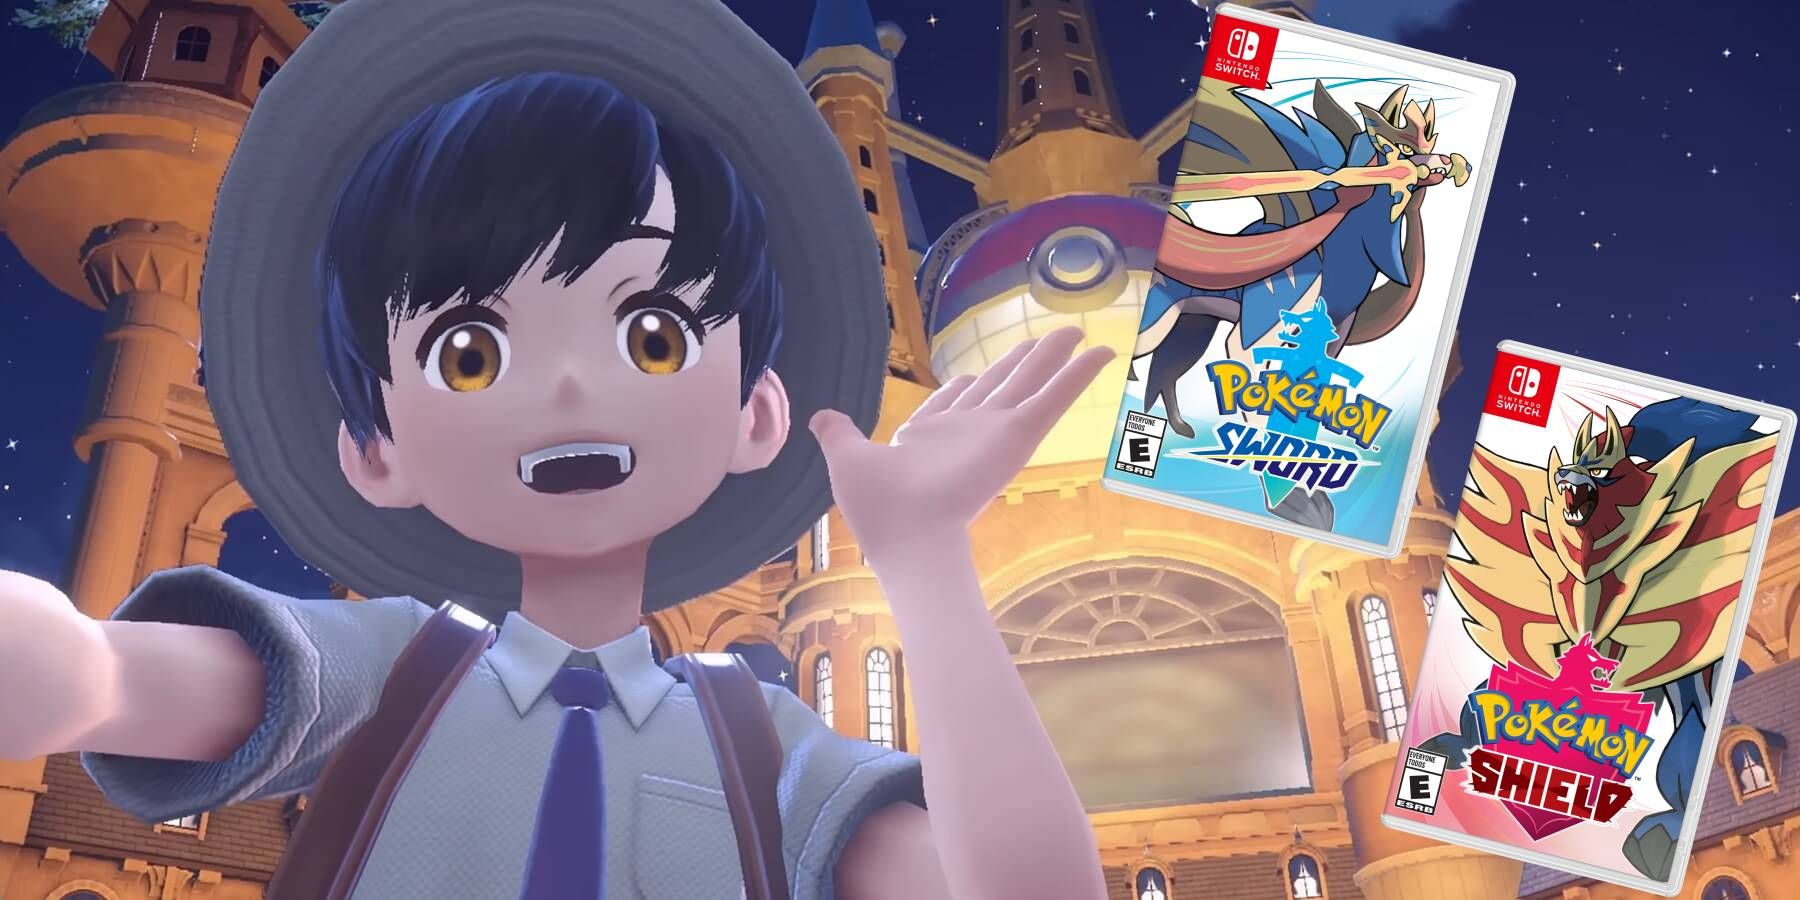 A trainer in Pokemon Scarlet & Violet taking a selfie with boxes of Pokemon Sword and Shield